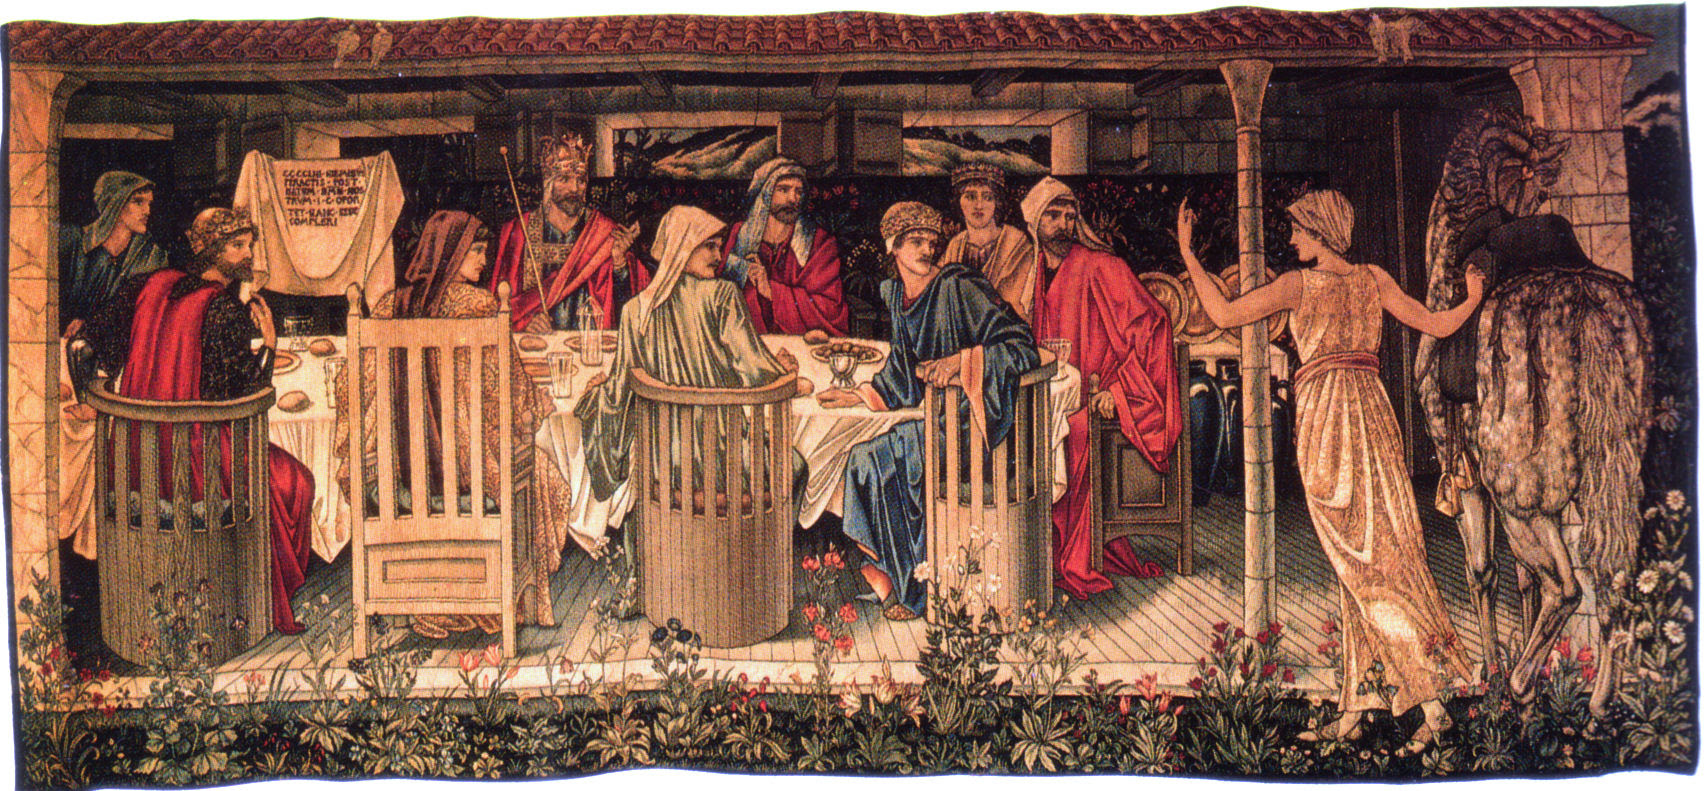 http://upload.wikimedia.org/wikipedia/commons/5/5a/Holy_Grail_tapestry_The_Summons.jpg